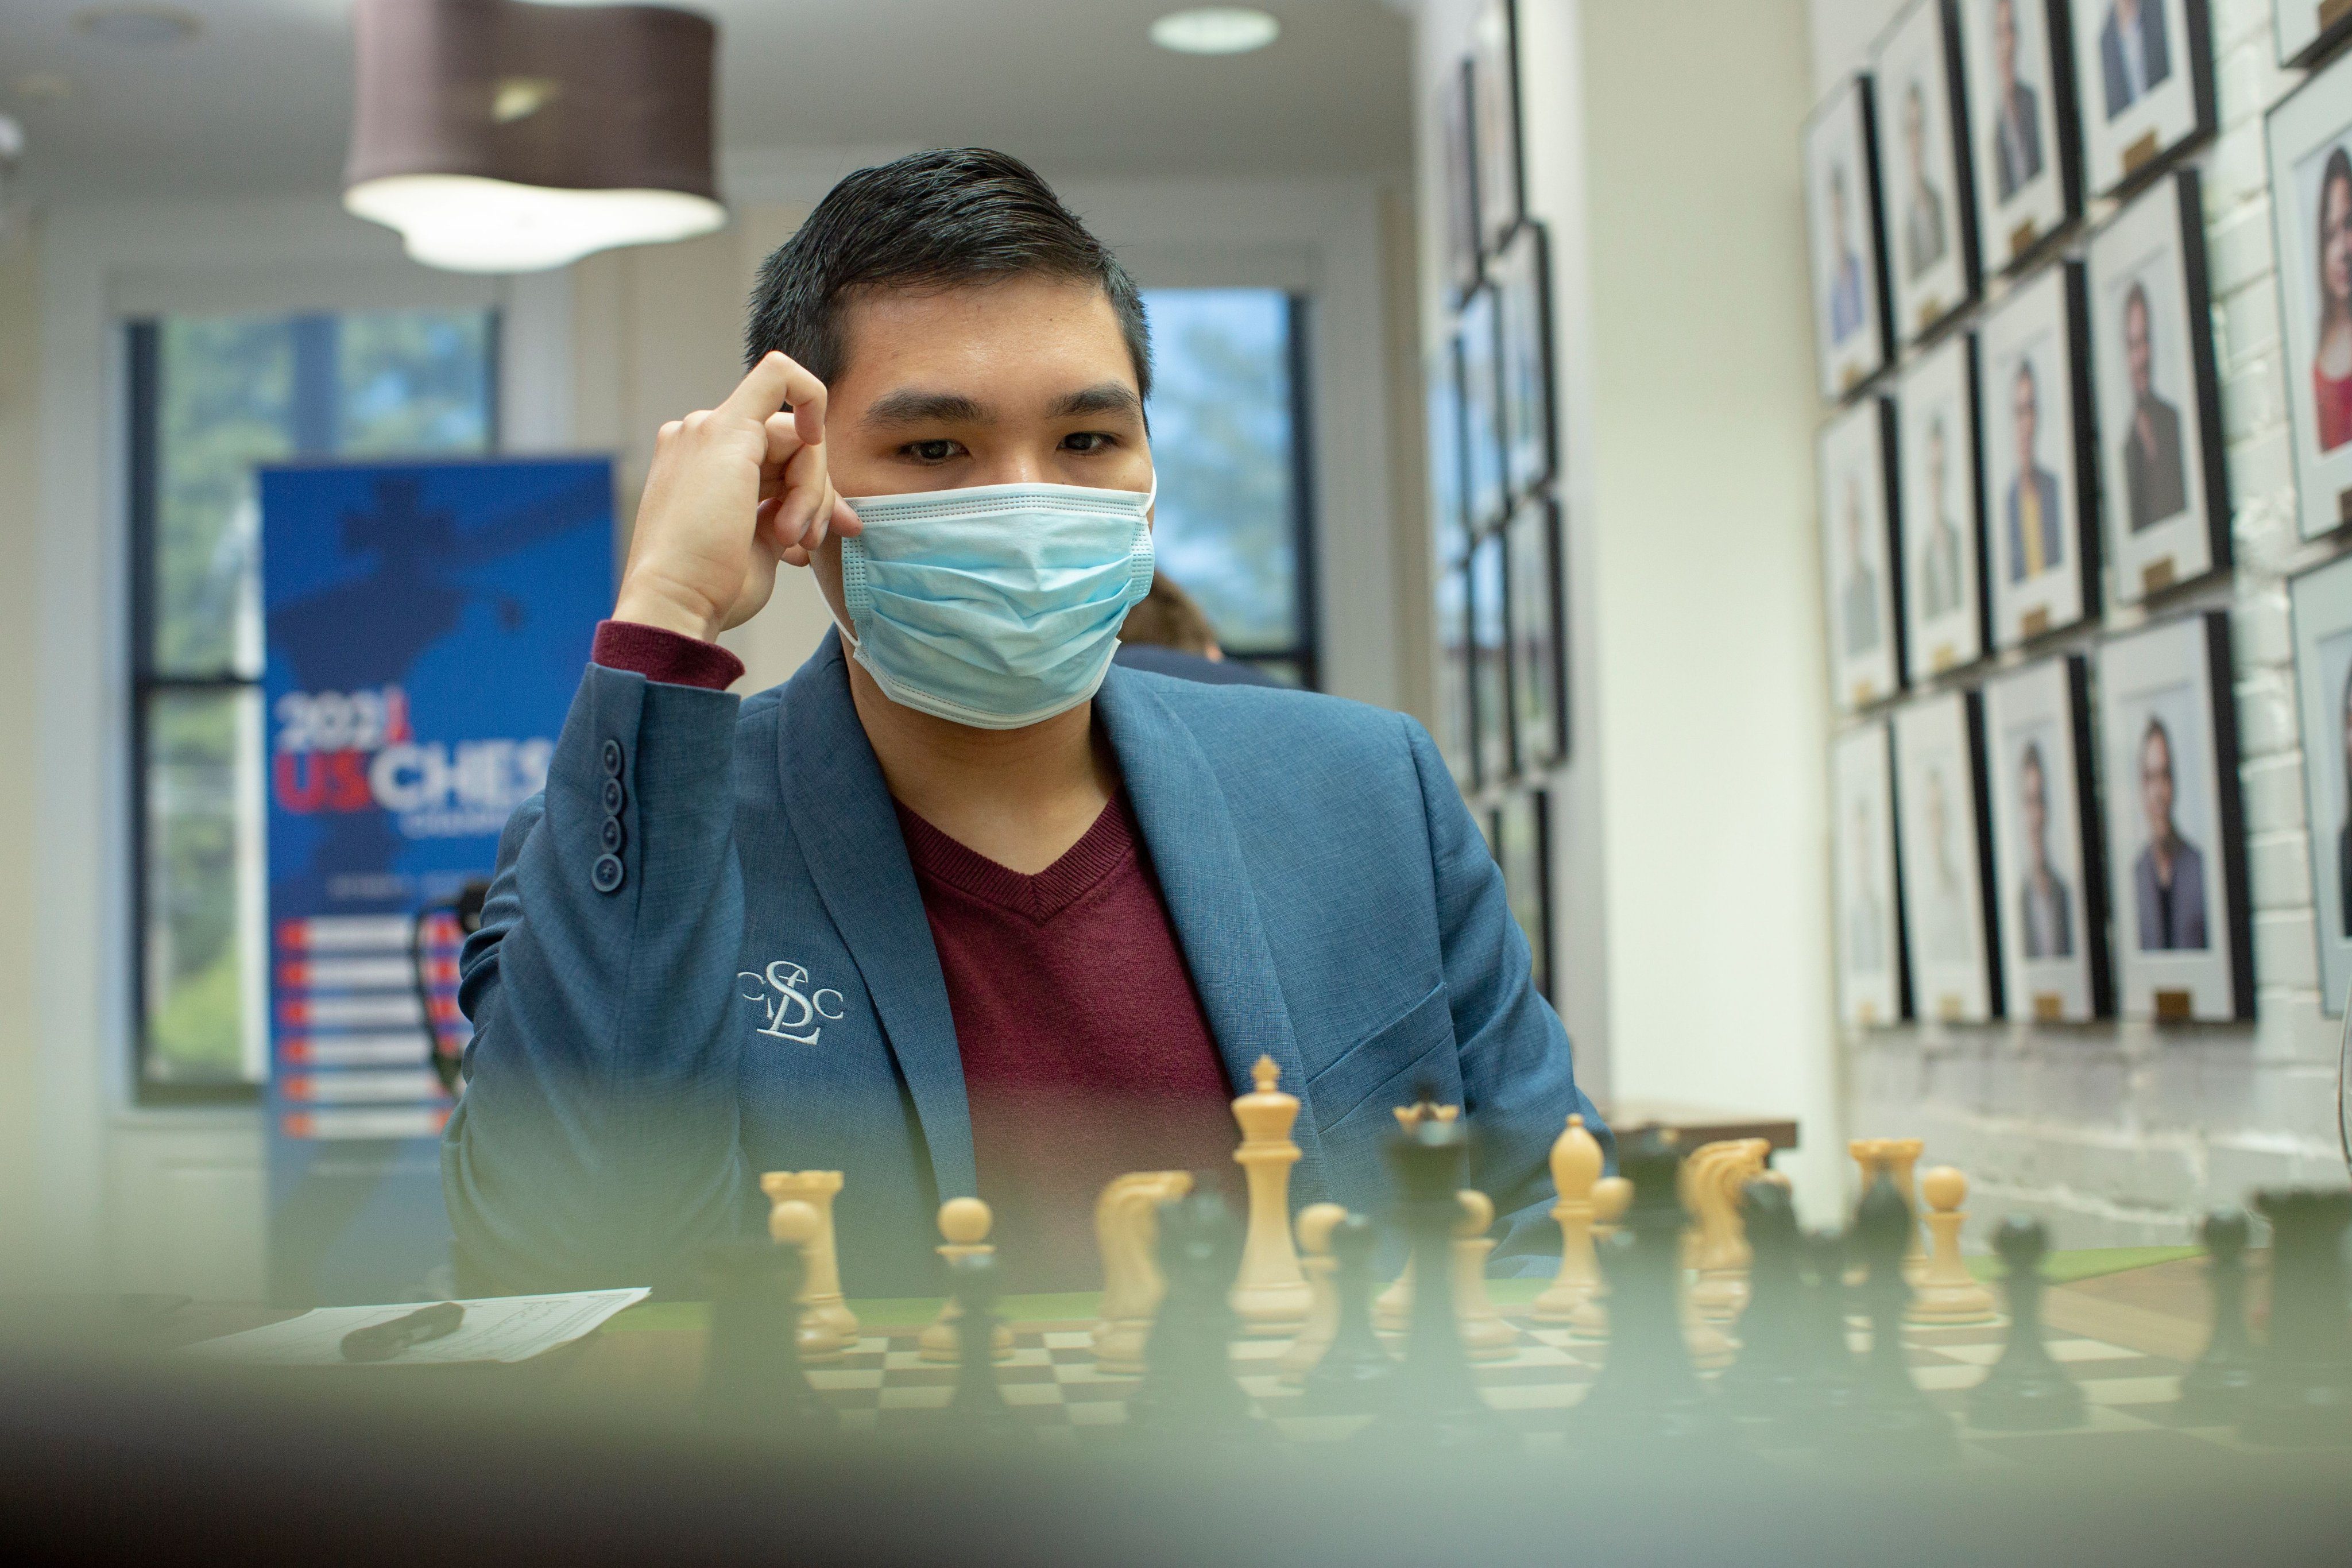 Wesley So-led WR Chess dominates 1st FIDE Rapid Team Championship